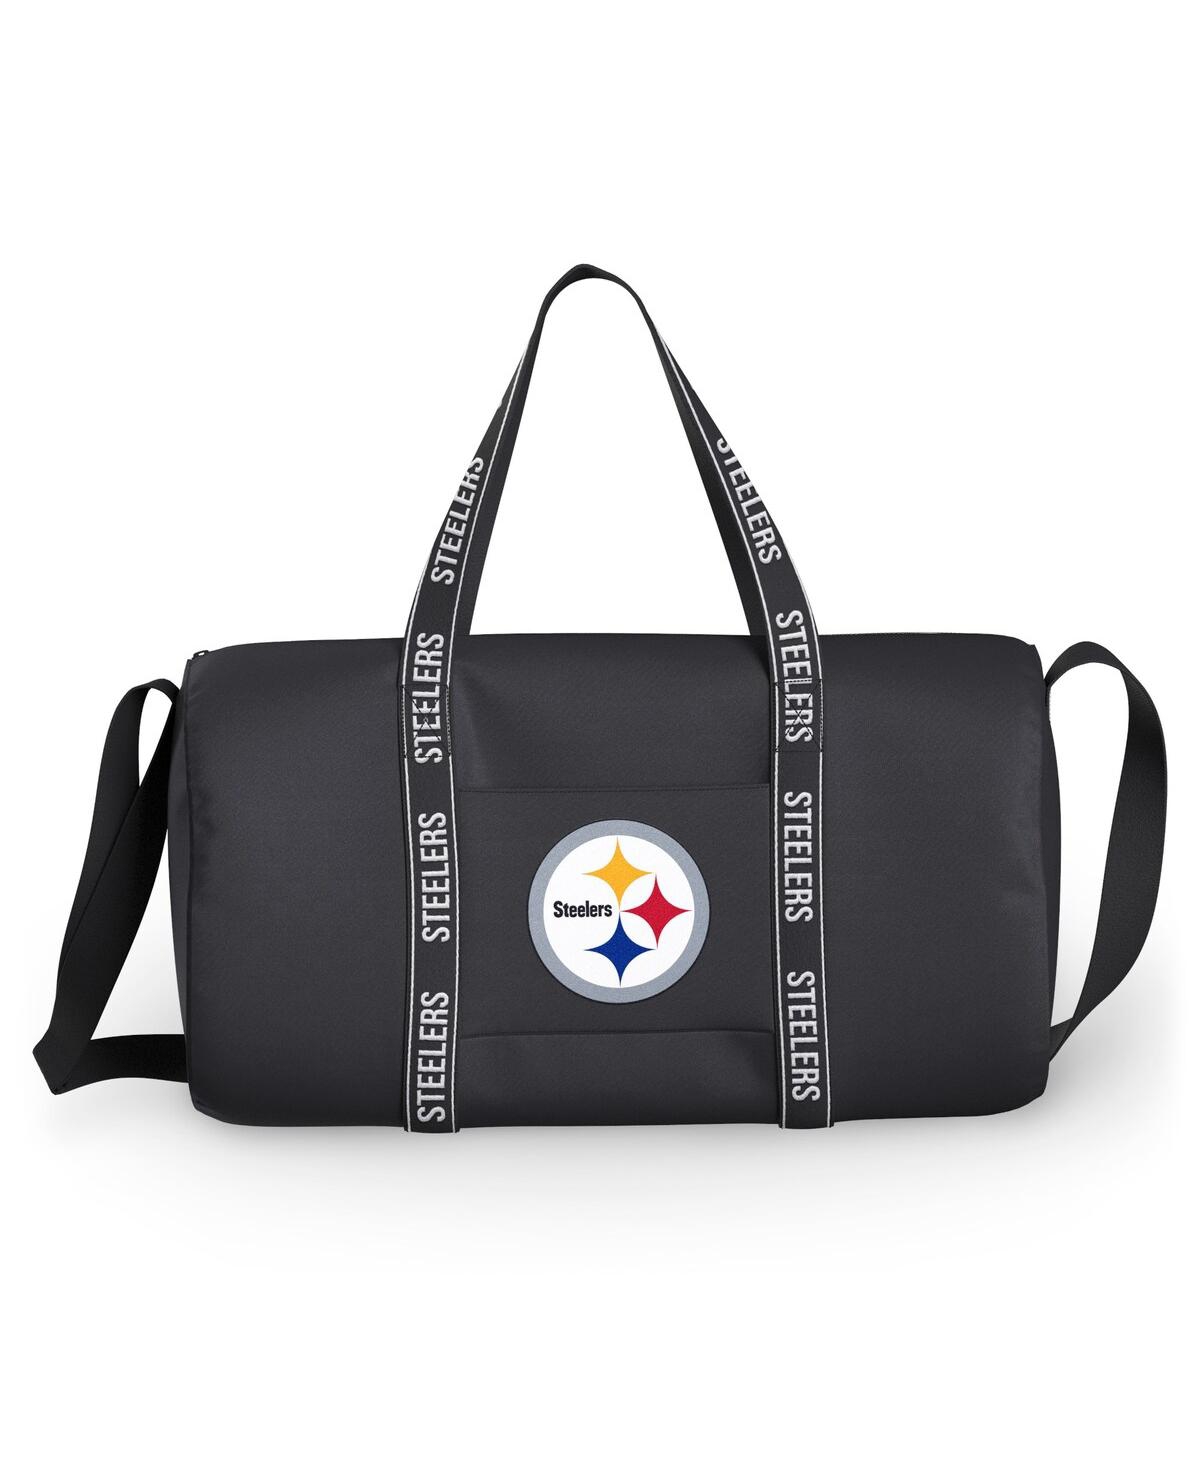 Men's and Women's Wear by Erin Andrews Pittsburgh Steelers Gym Duffle Bag - Black